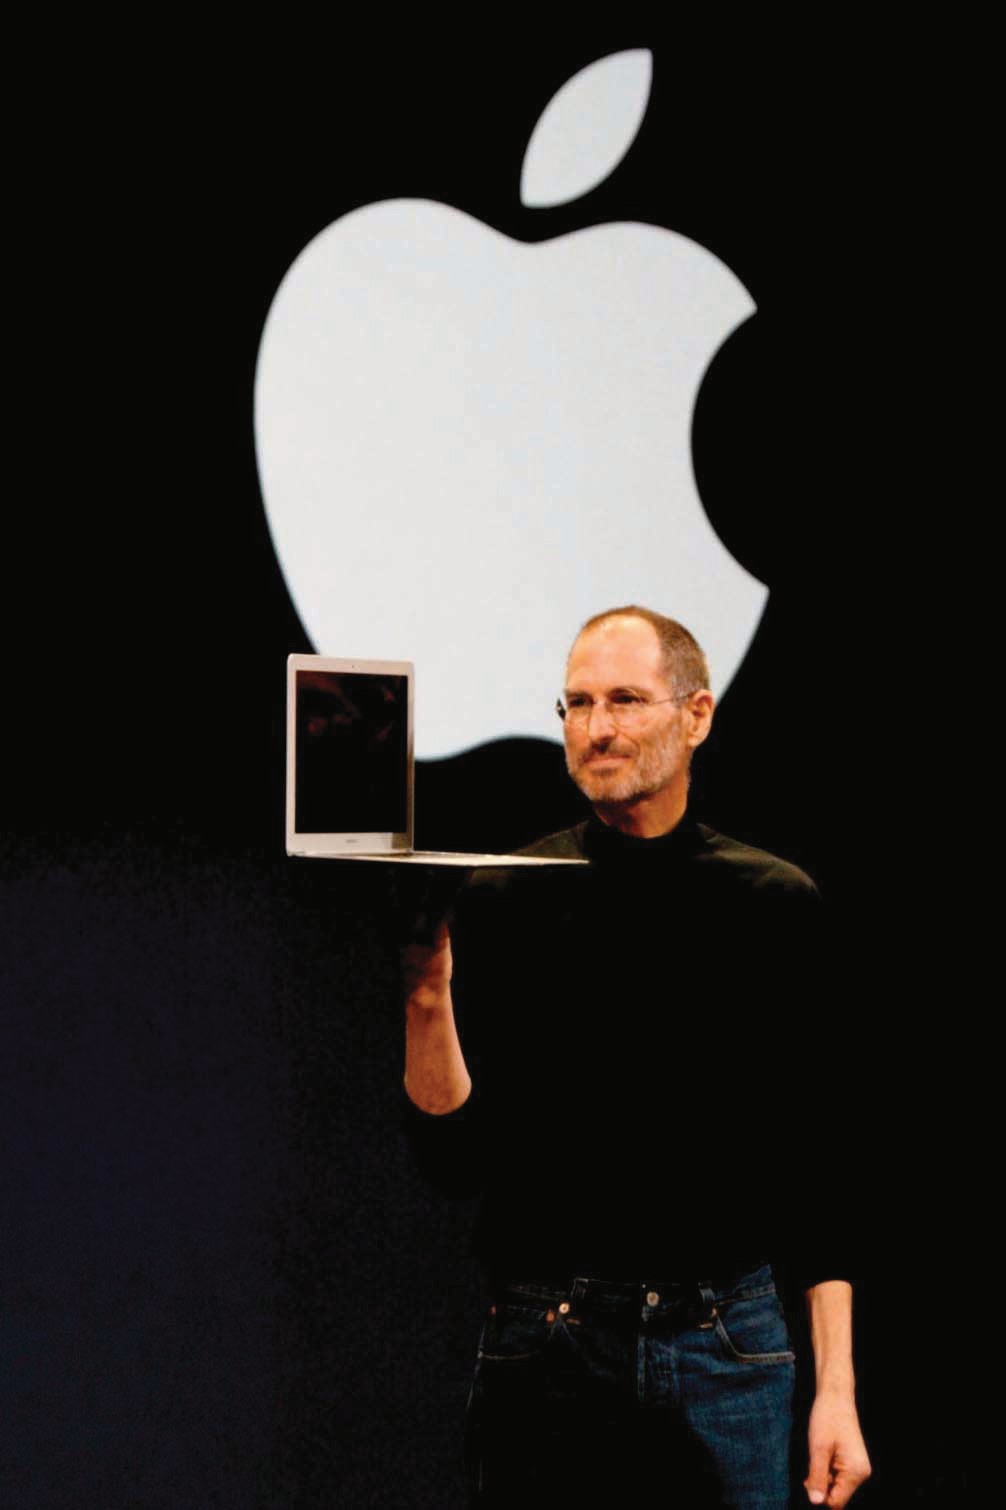 Steve Jobs presenting a new Apple product.